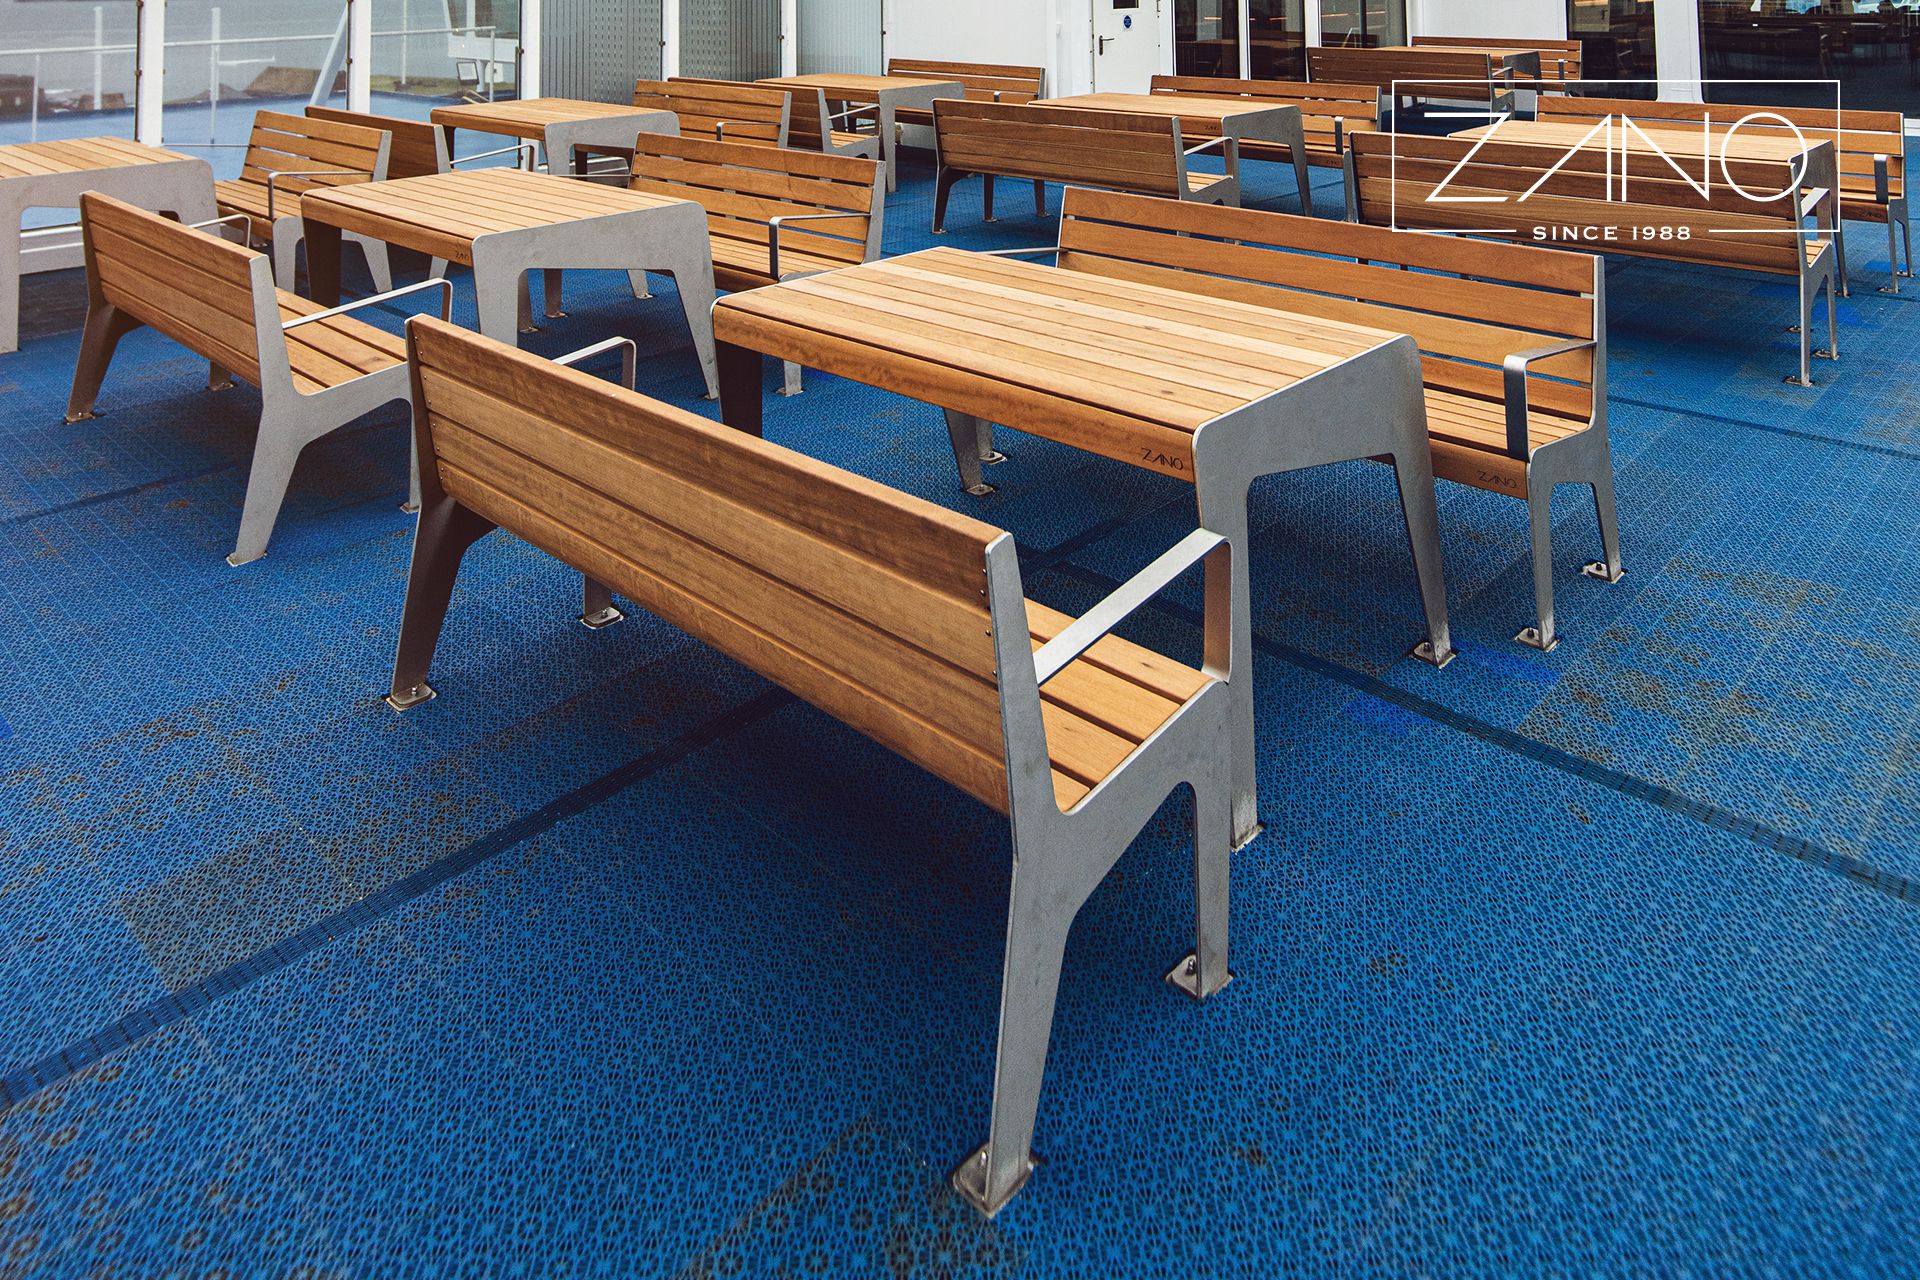 Benches on the ship's deck